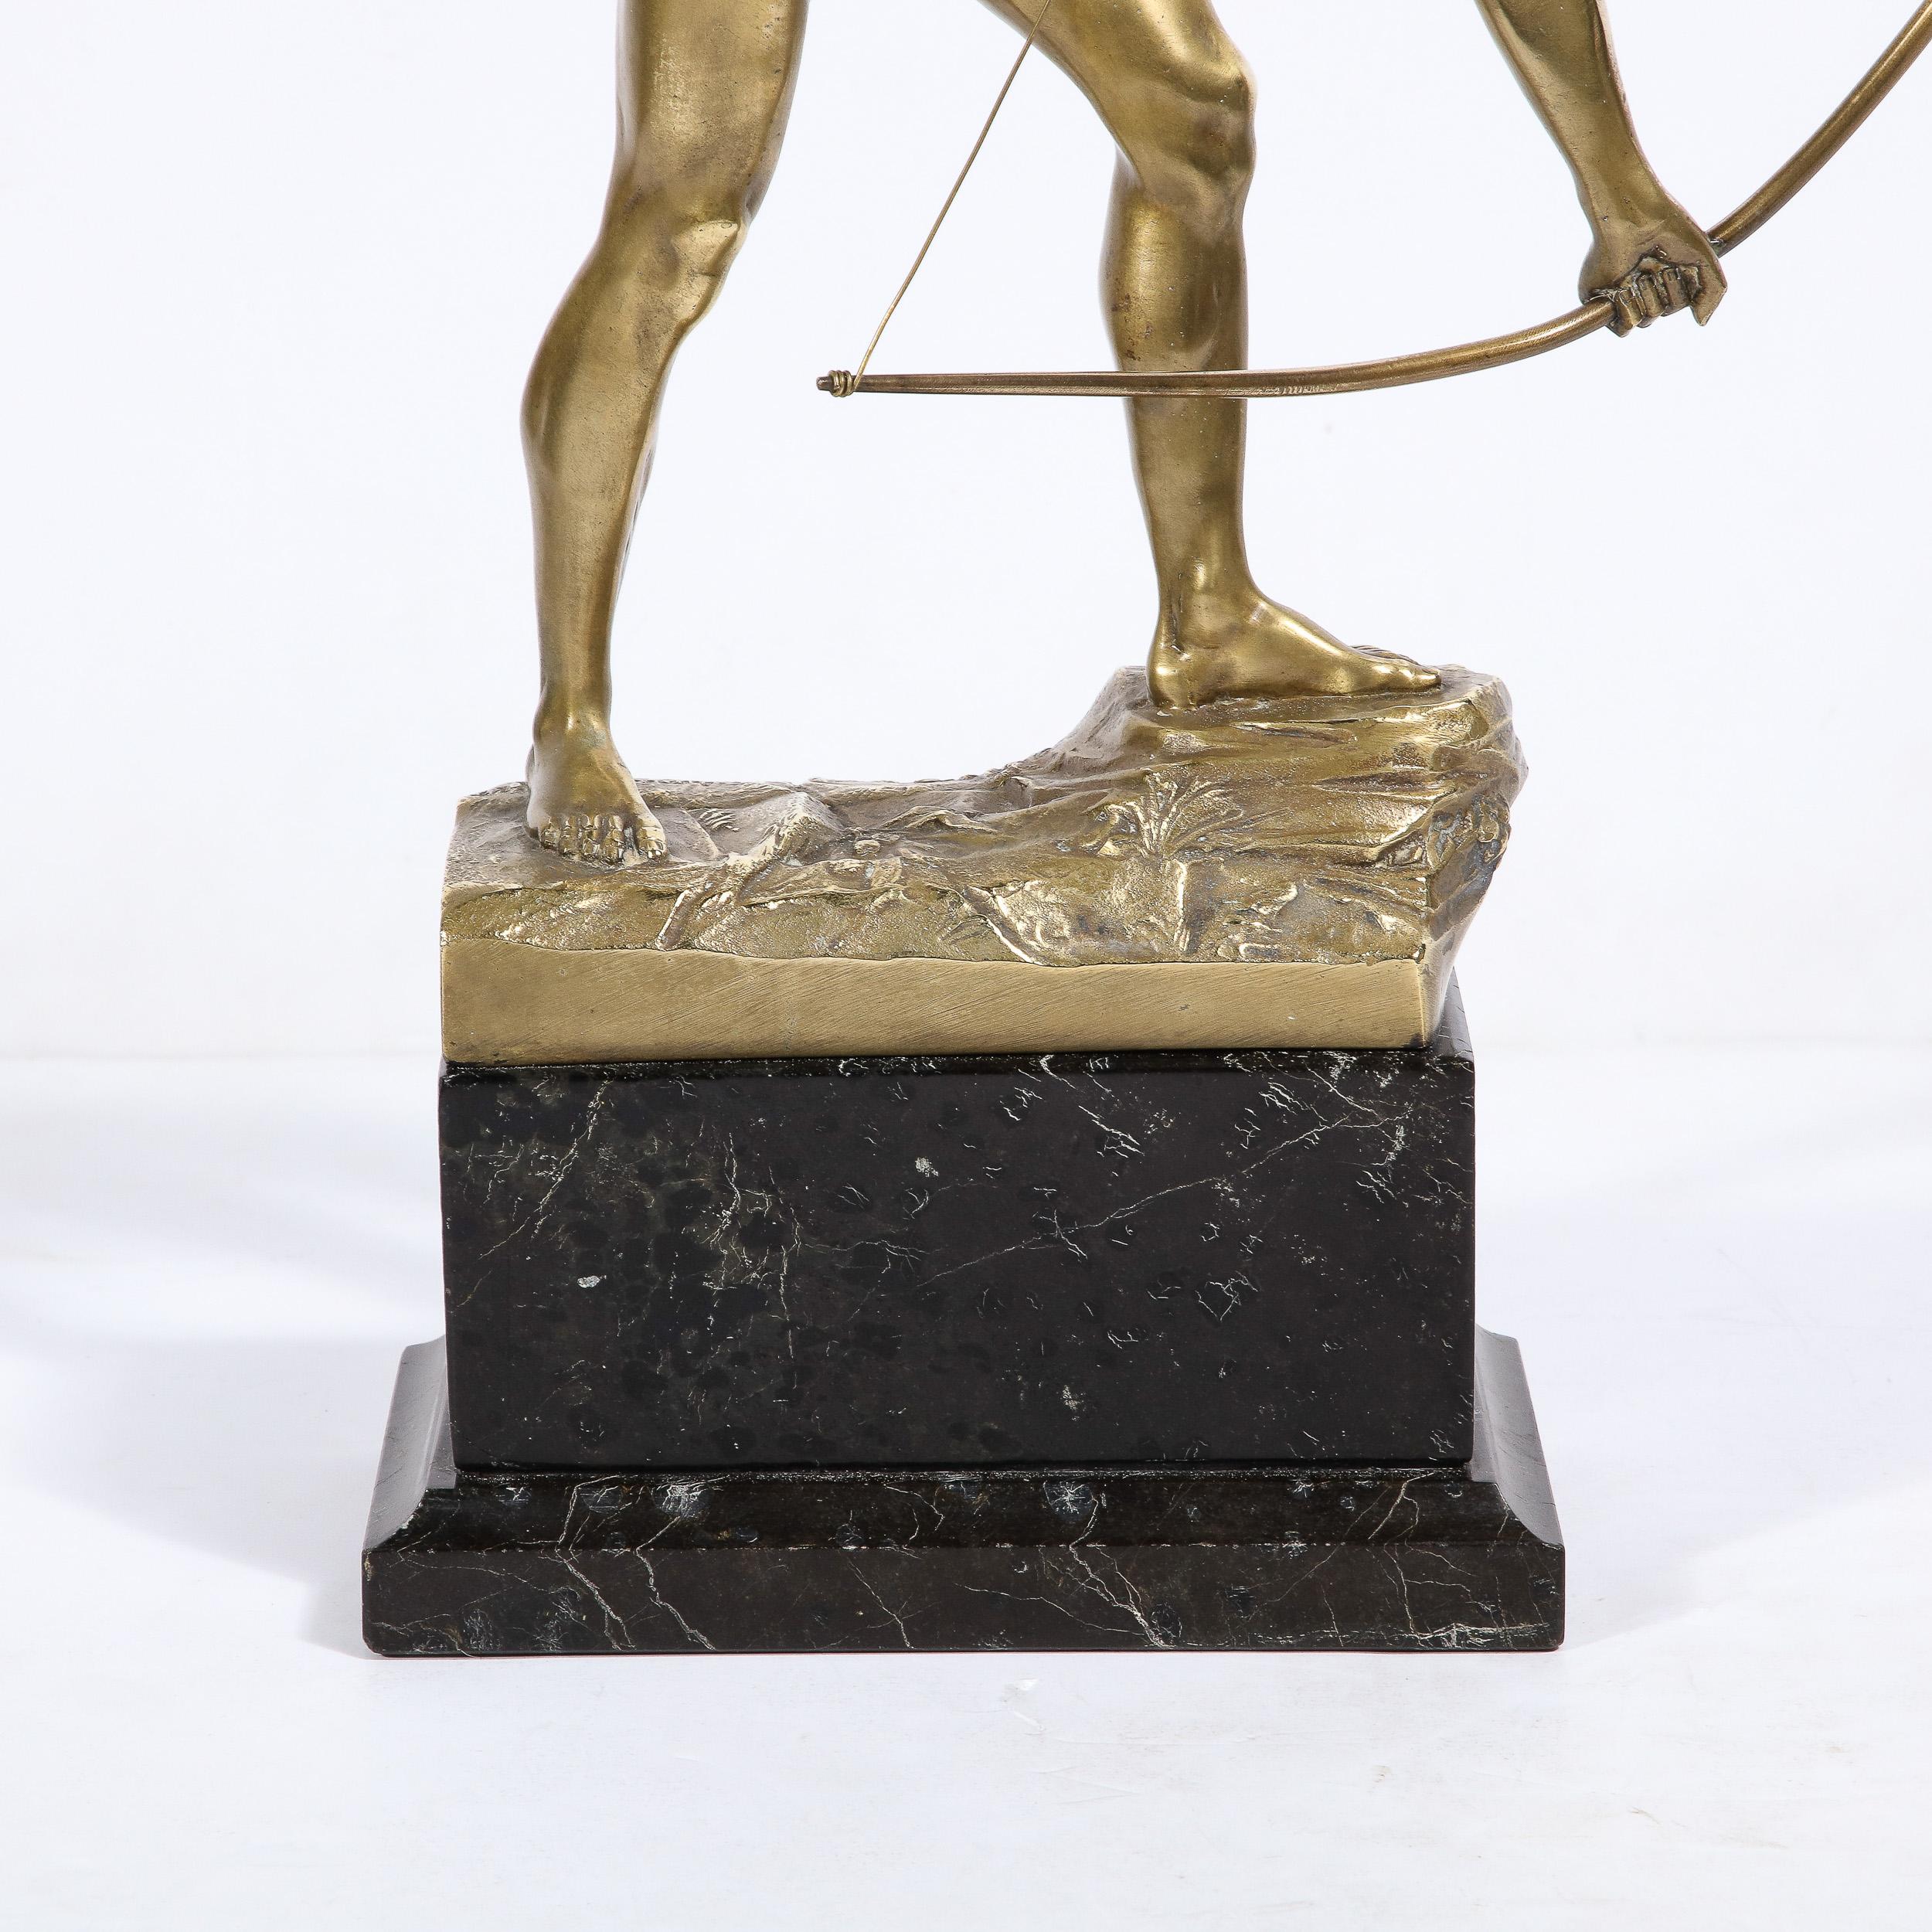 Art Deco Gilt Bronze Archer Sculpture on Black Marble Base by Otto Schmidt-Hofer In Excellent Condition For Sale In New York, NY